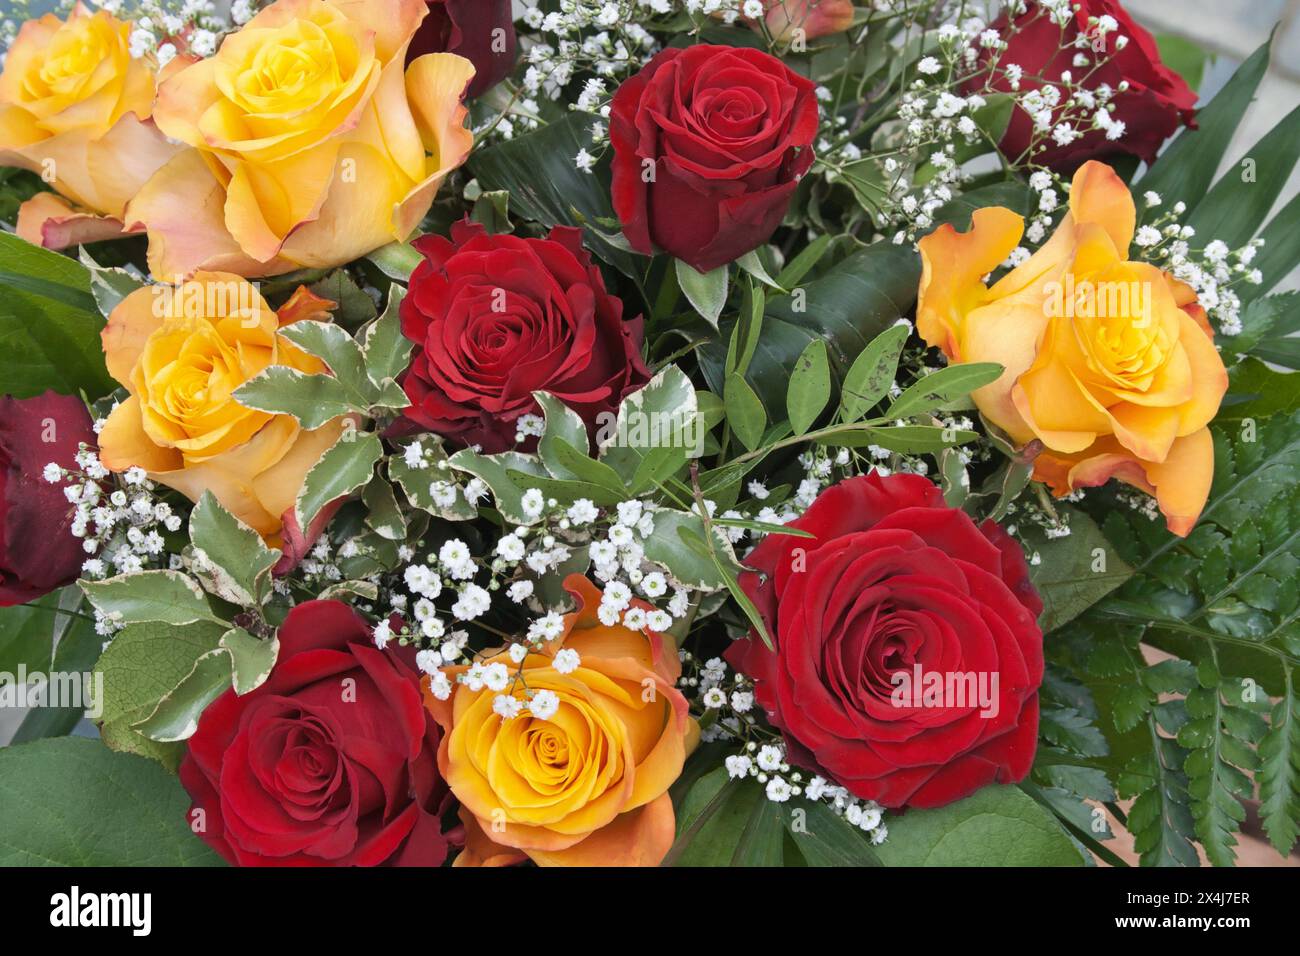 red and yellow roses bunch of flowers floristry gypsophila Stock Photo